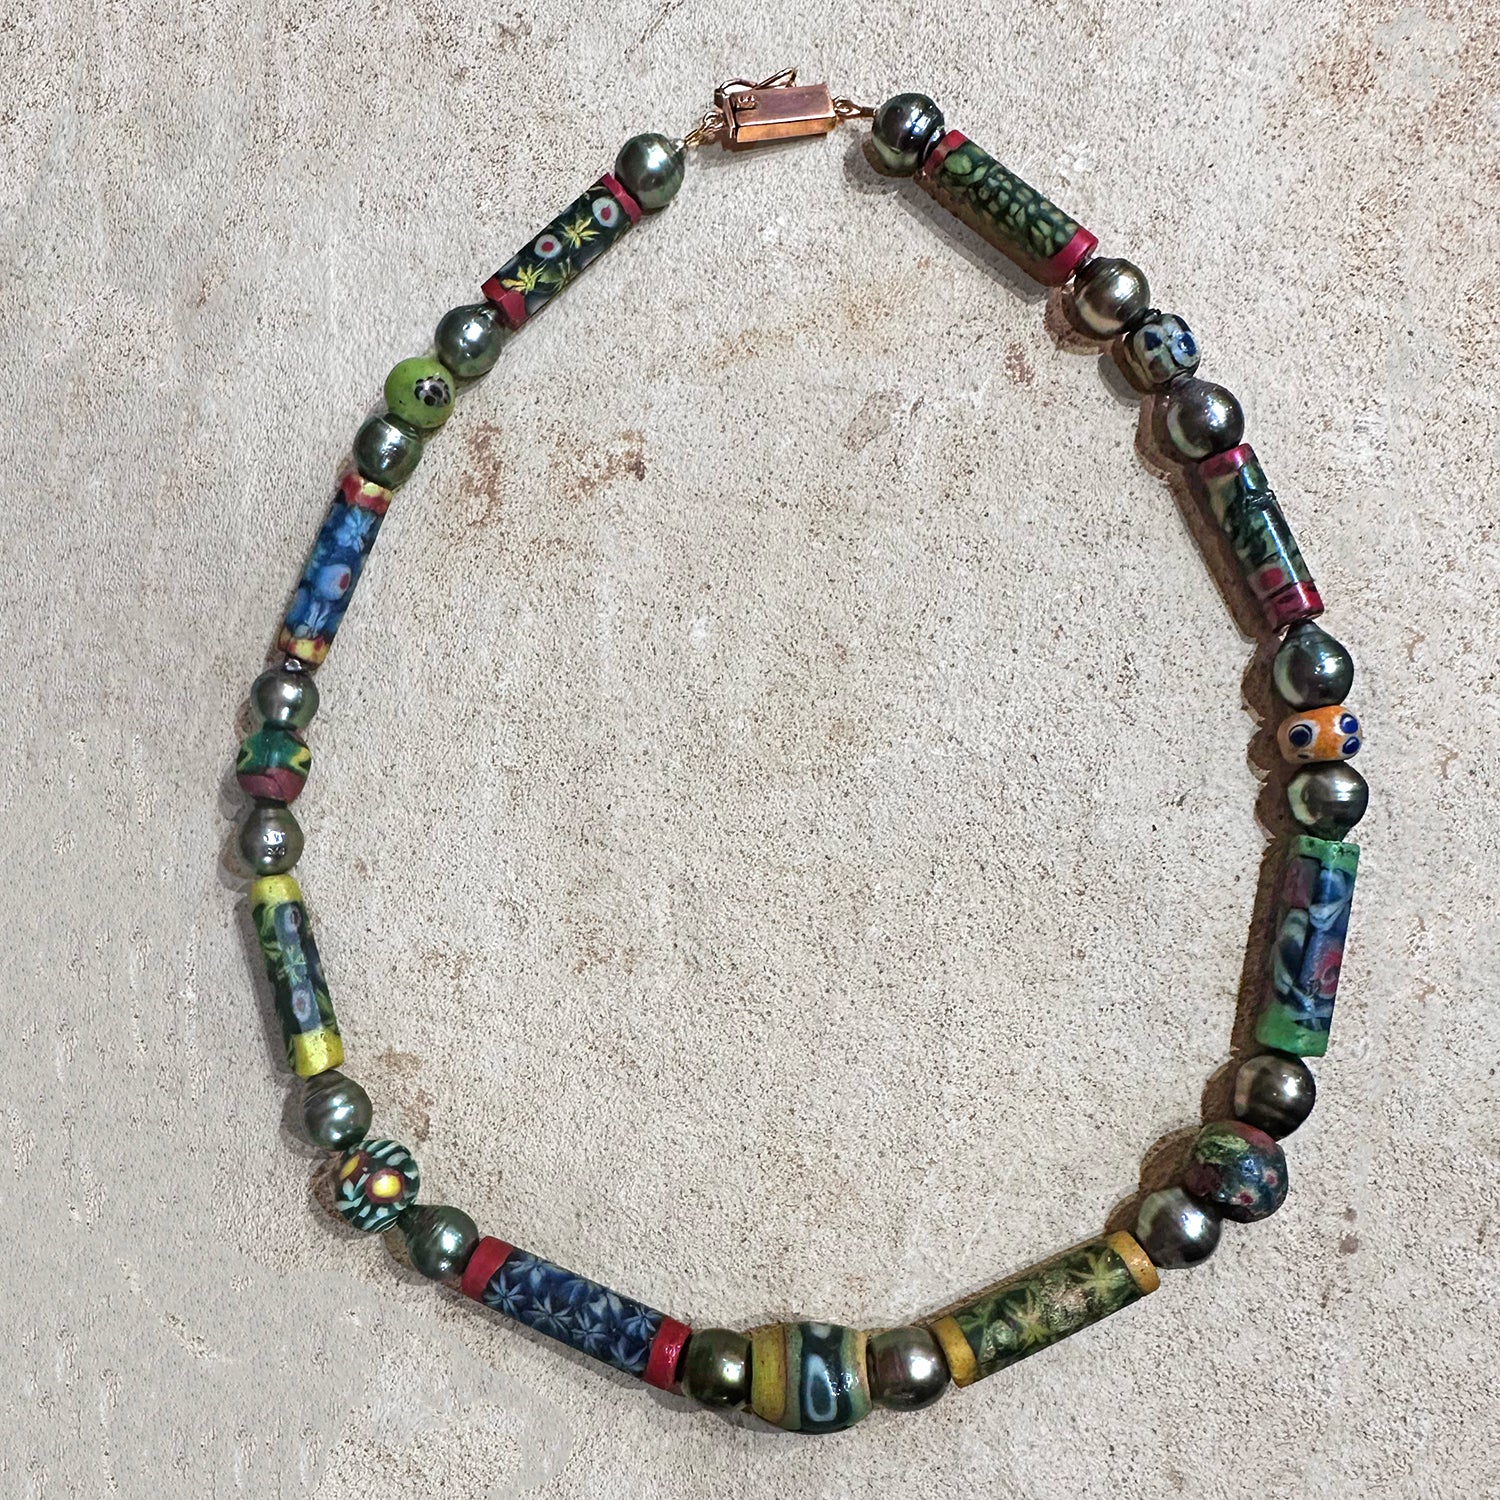 An Egyptian Millefiori and Mosaic Glass Beads, Roman Imperial Period, ca. 1st century BCE/CE